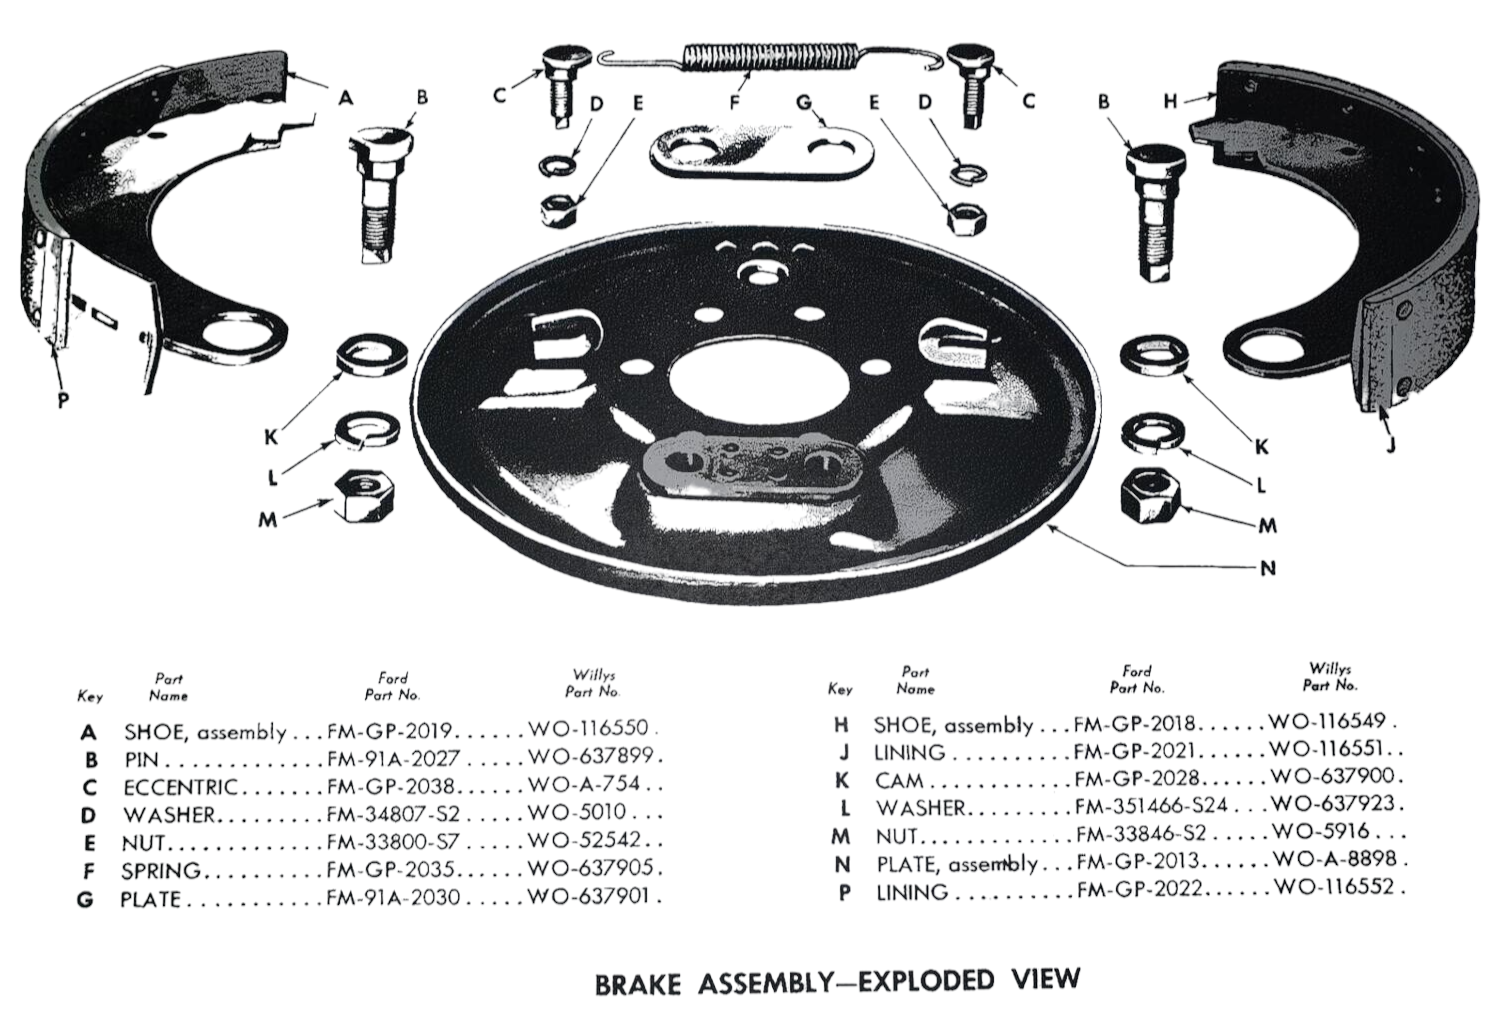 Brake Assembly - Exploded View - Drawing for Information Only